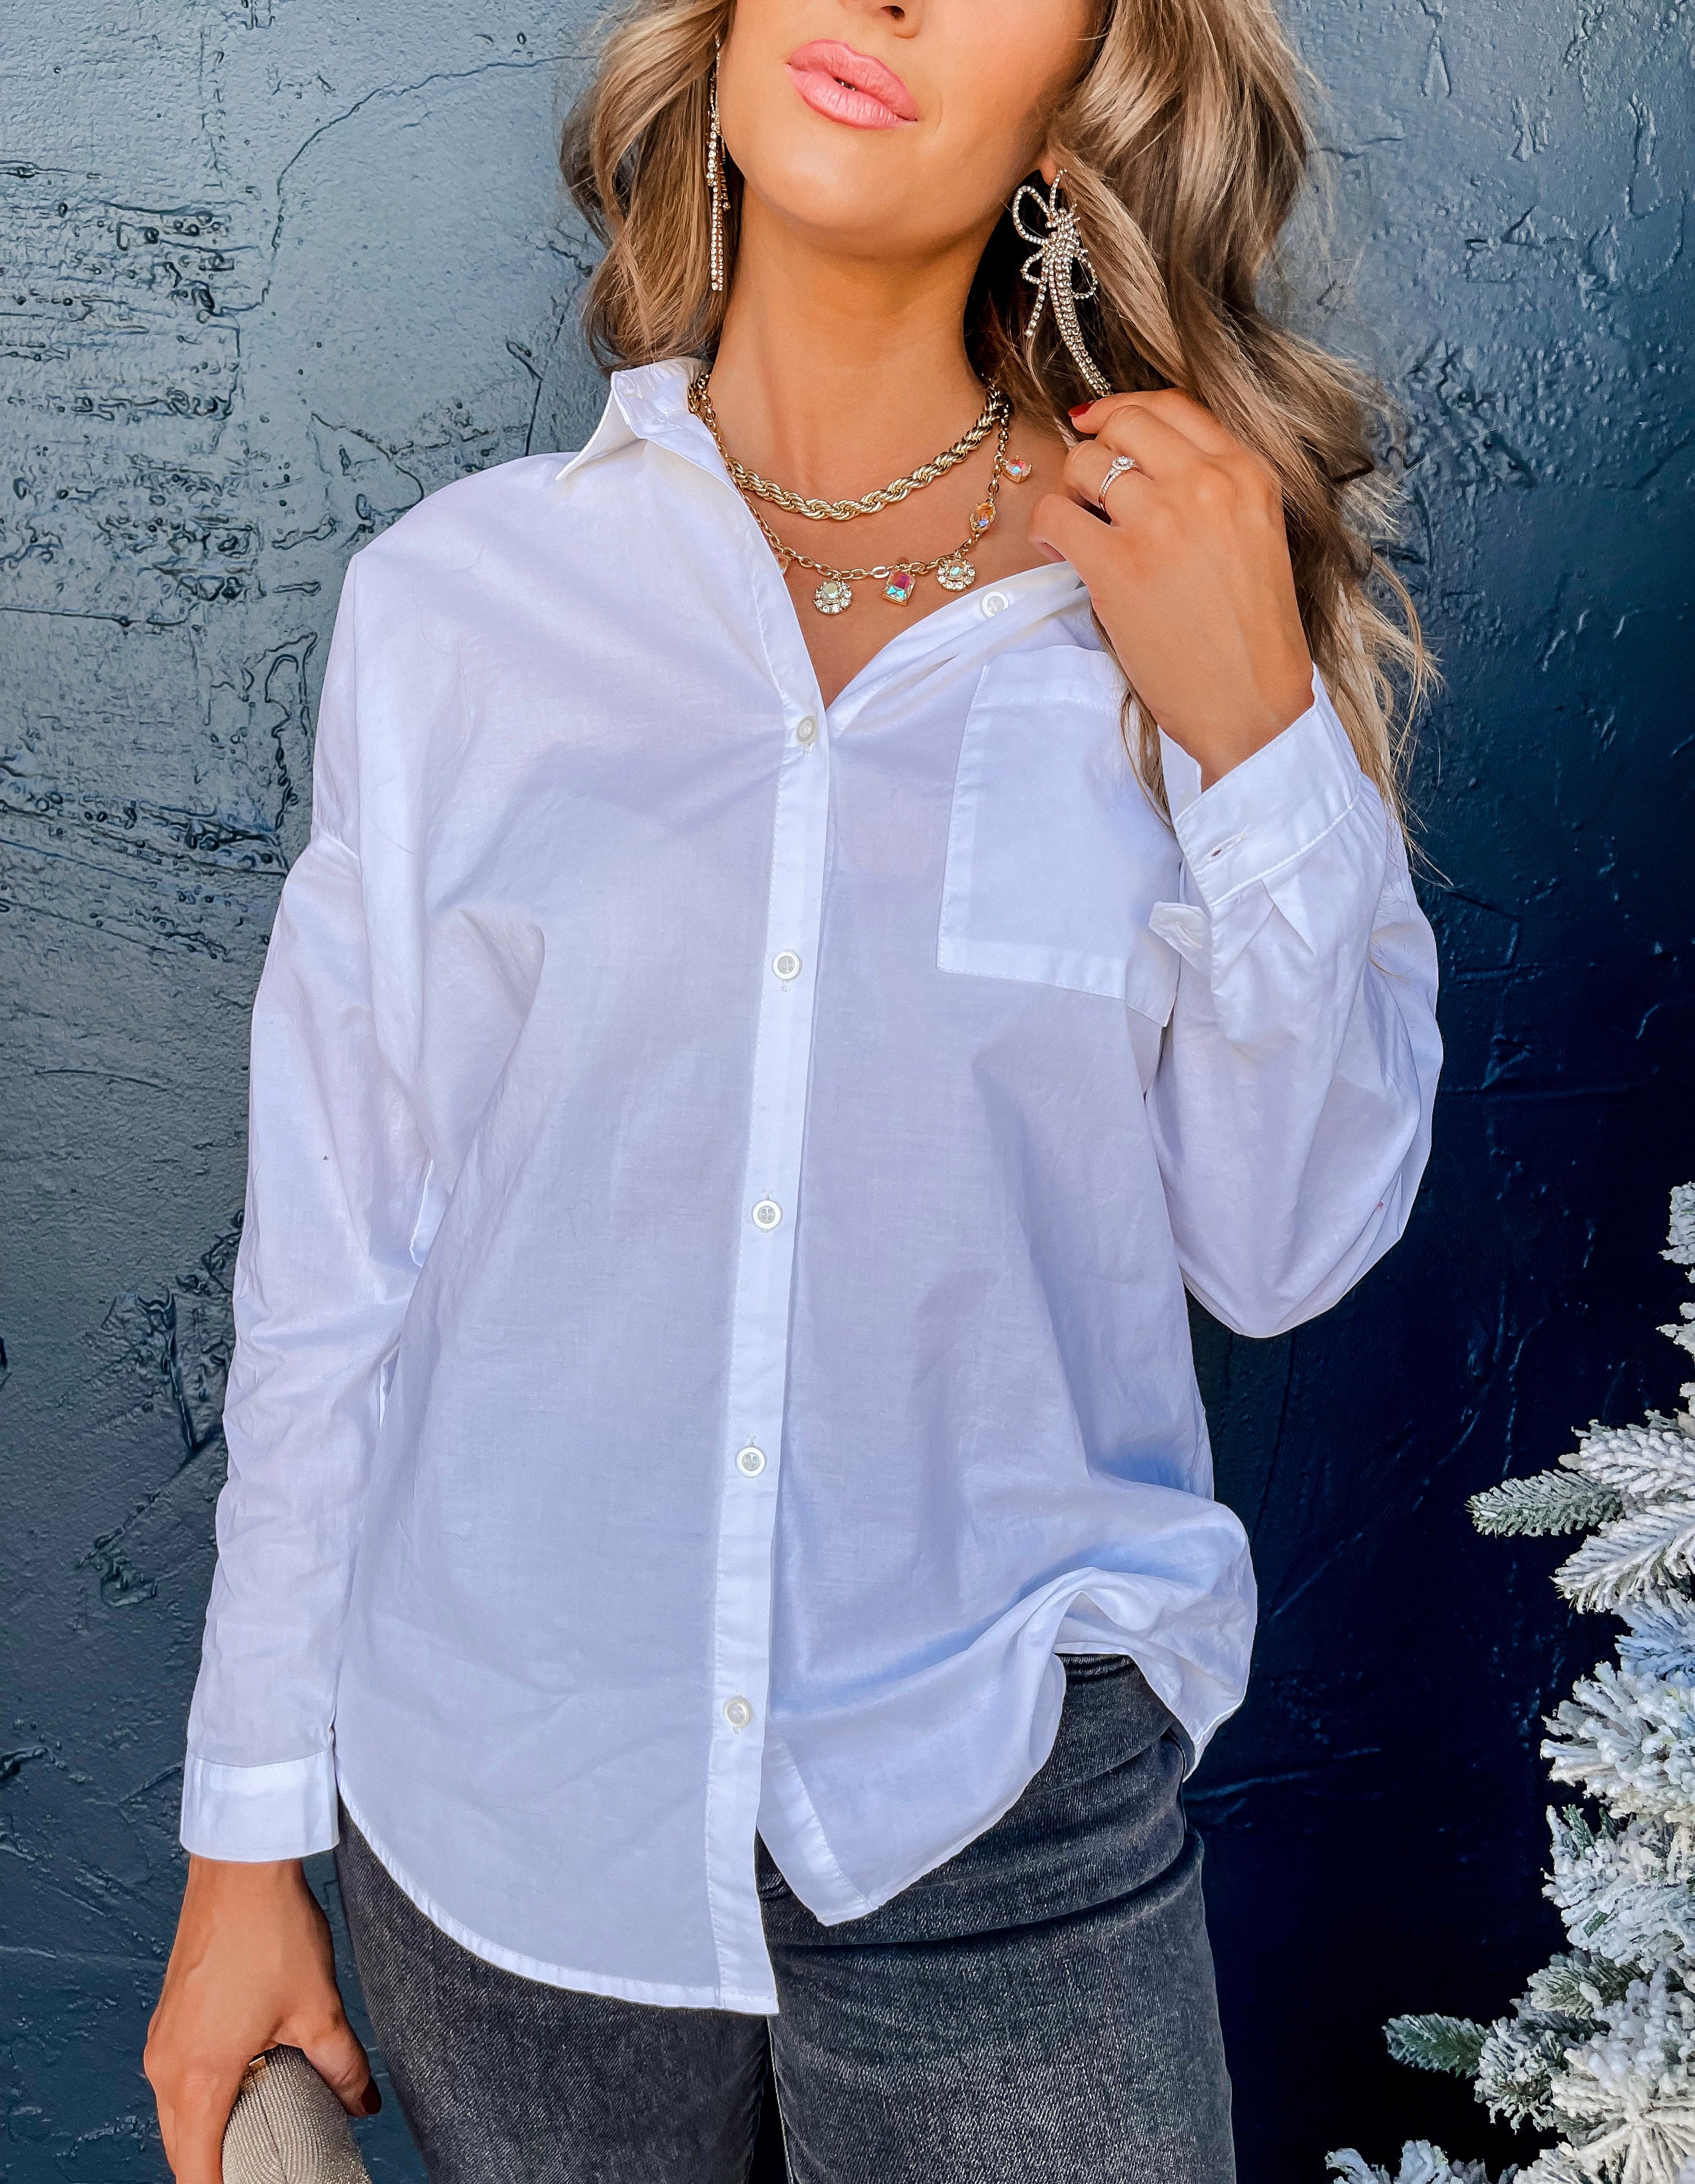 Chic And Simple Oversized Button Front Top